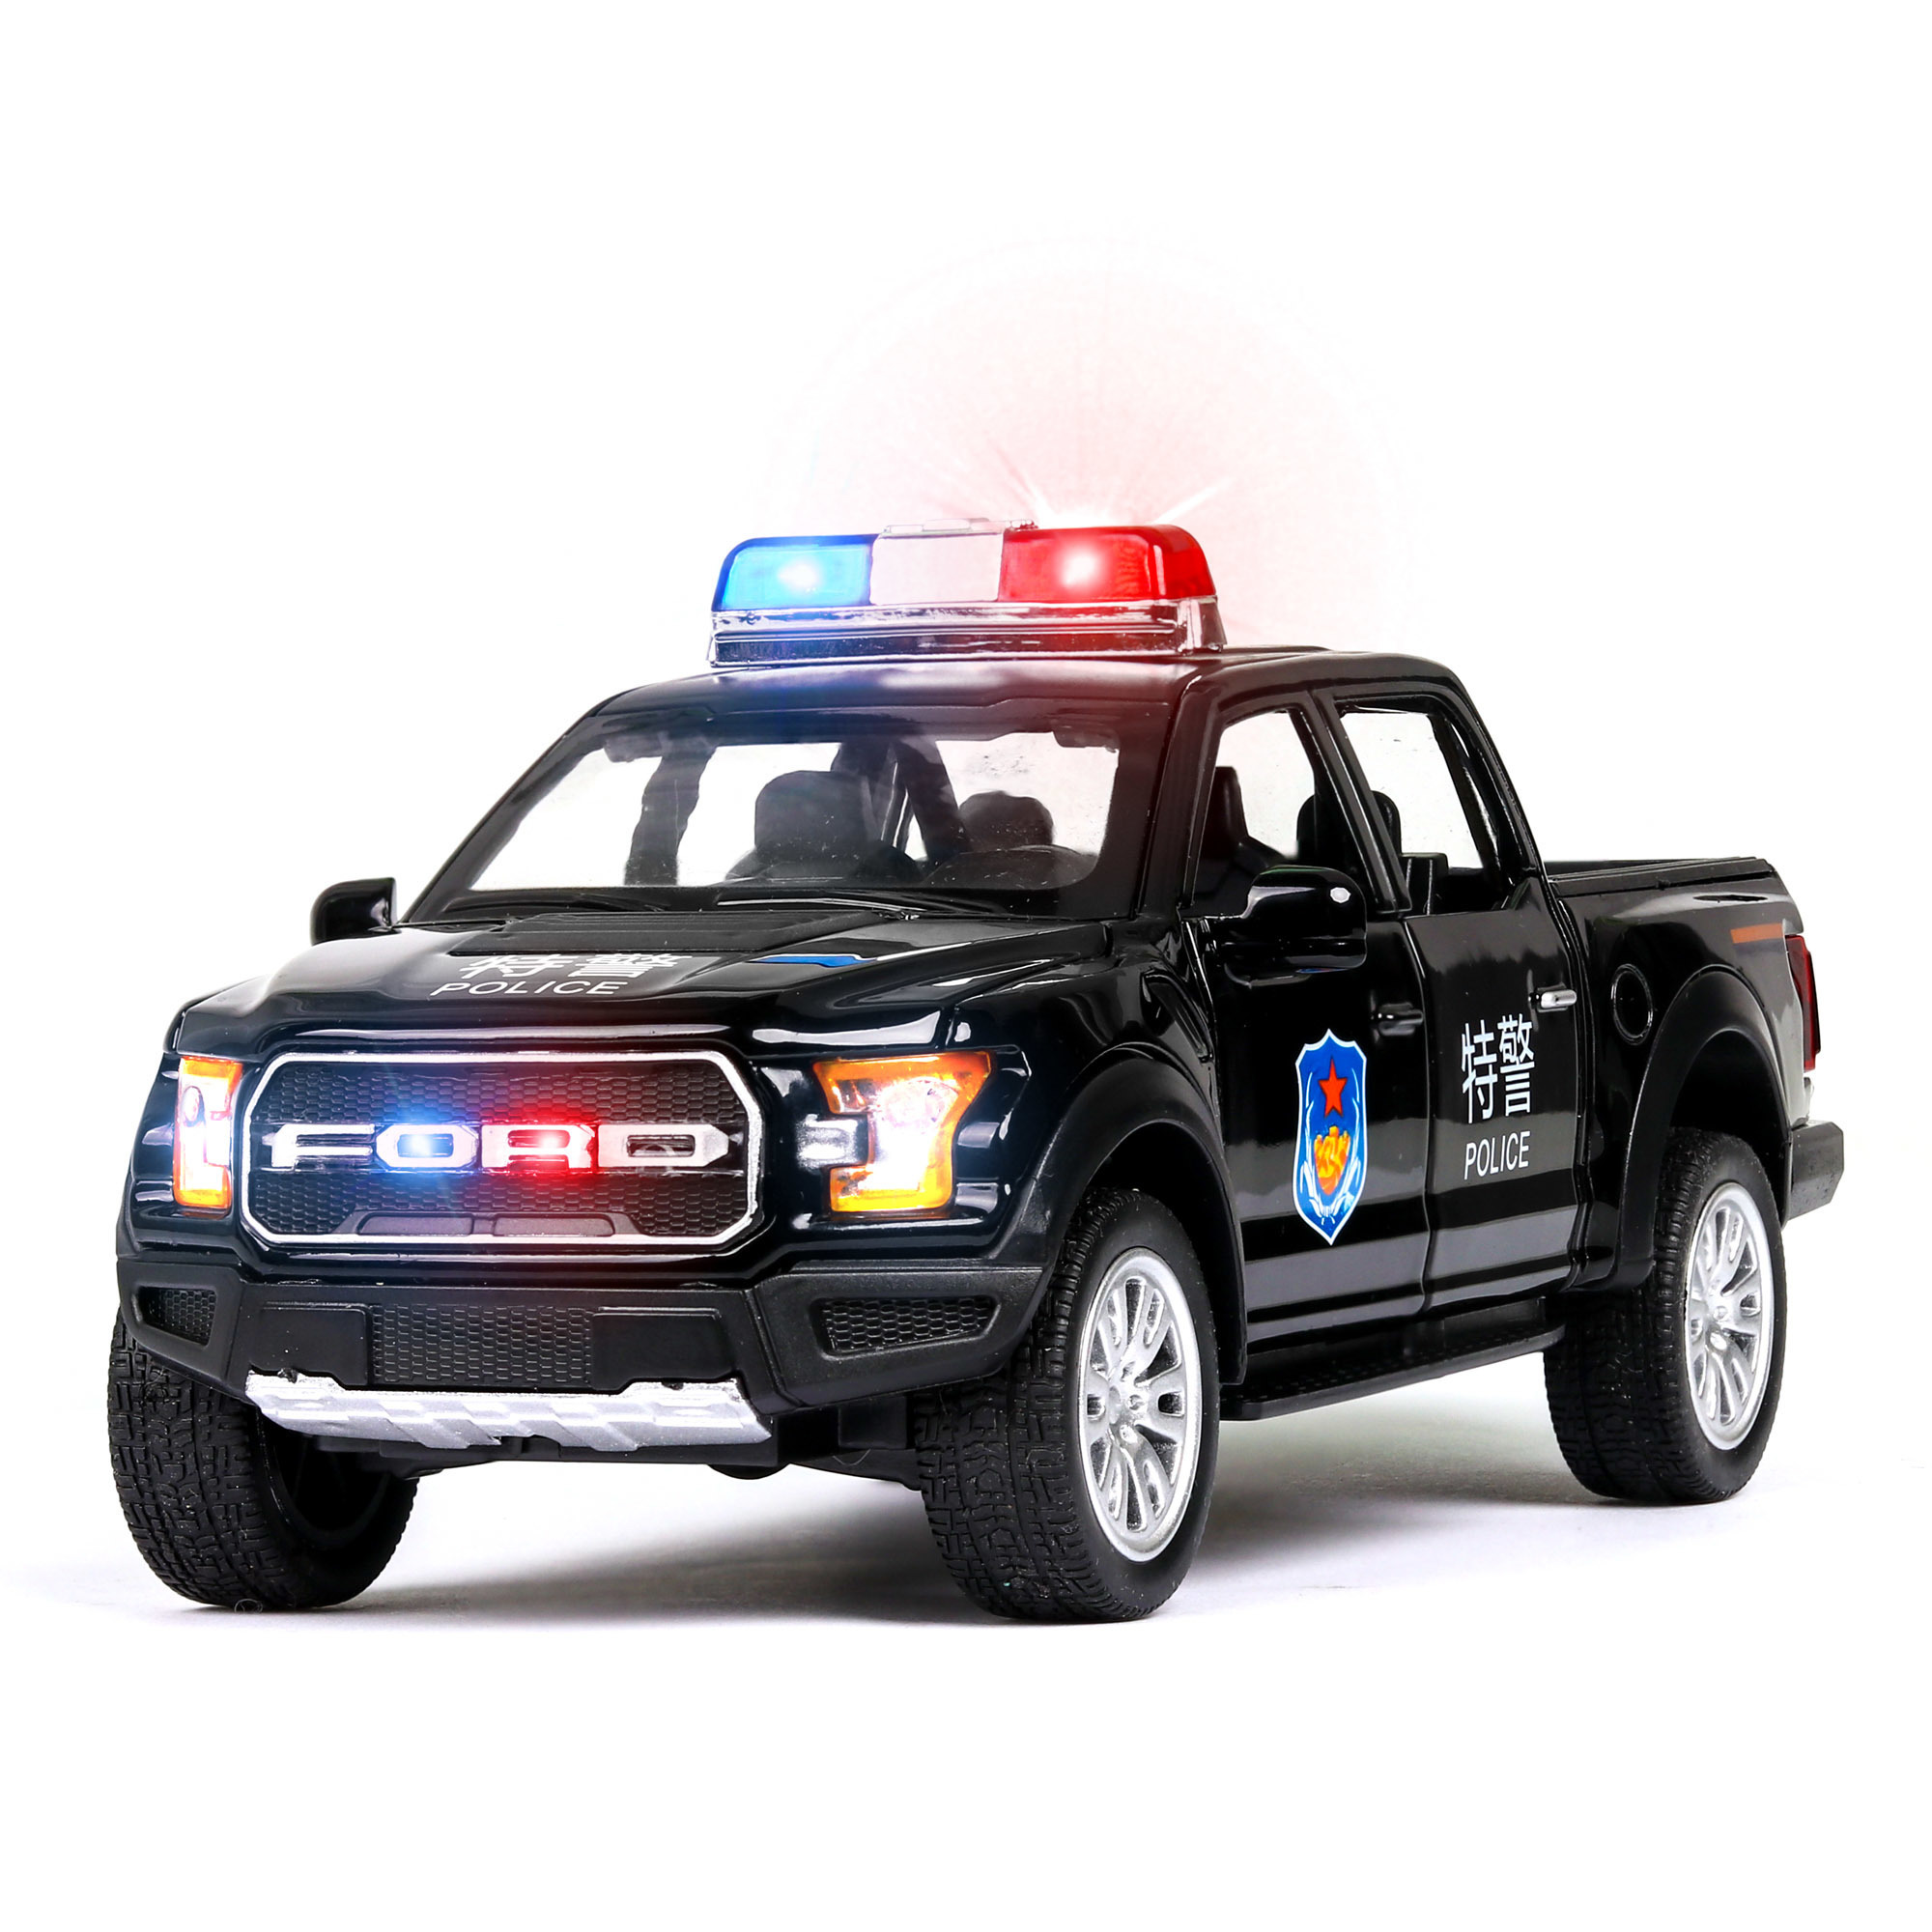 

Car New Police 1:32 Ford Alloy F150 Truck Model Diecasts & Vehicles Cars Educational Toys For Children Gifts Boy Toy